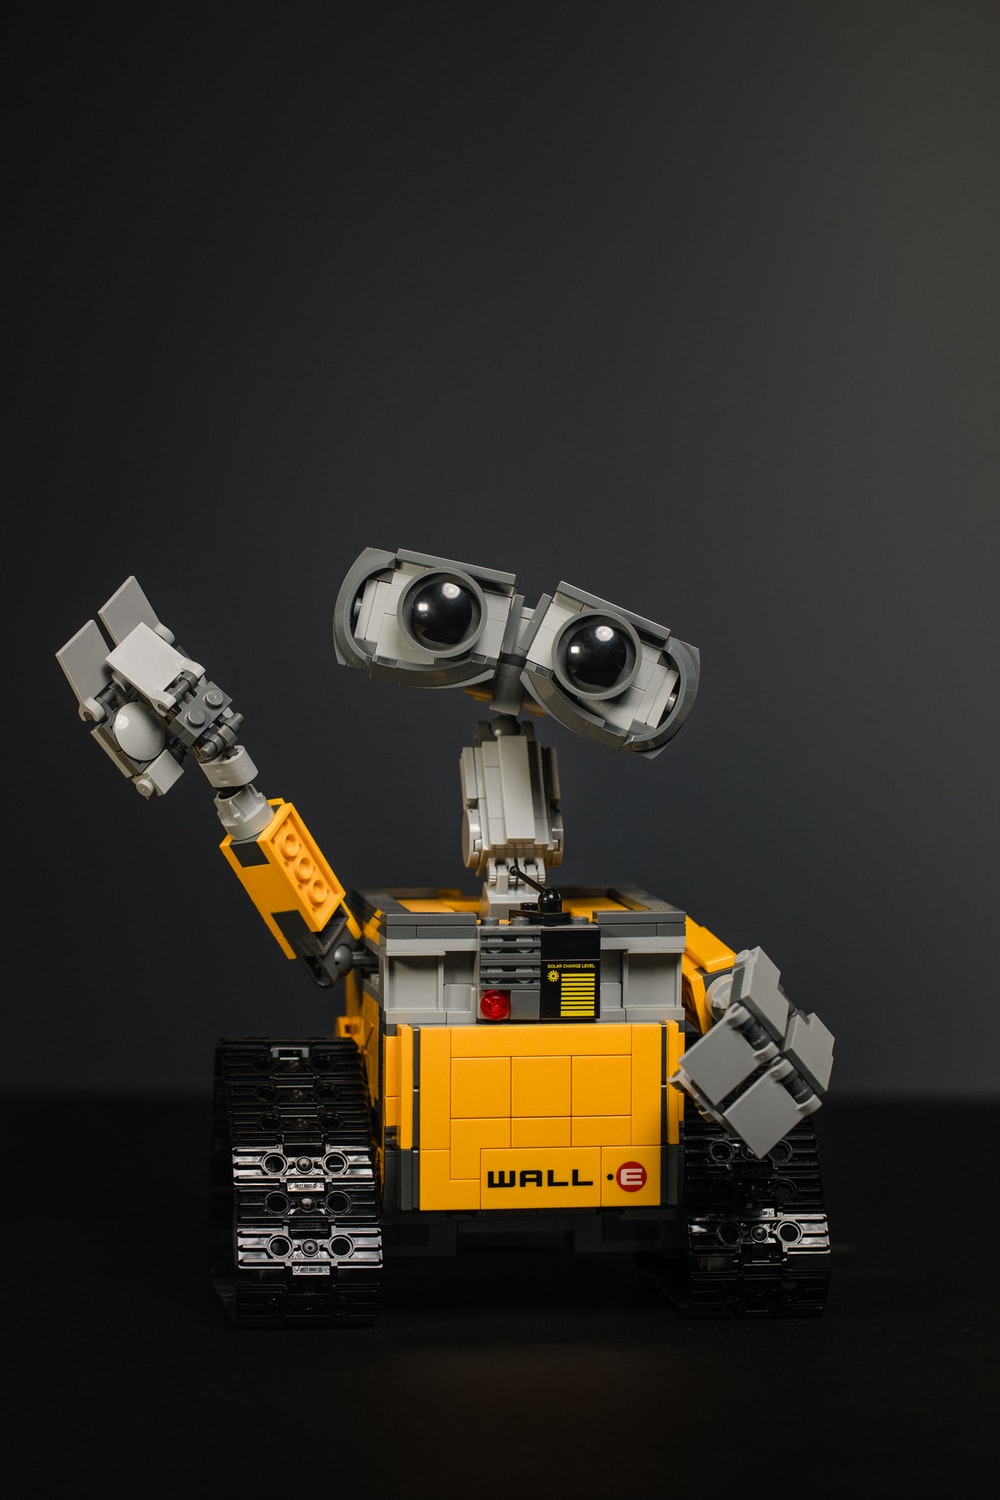 Robot Picture. Download Free Image